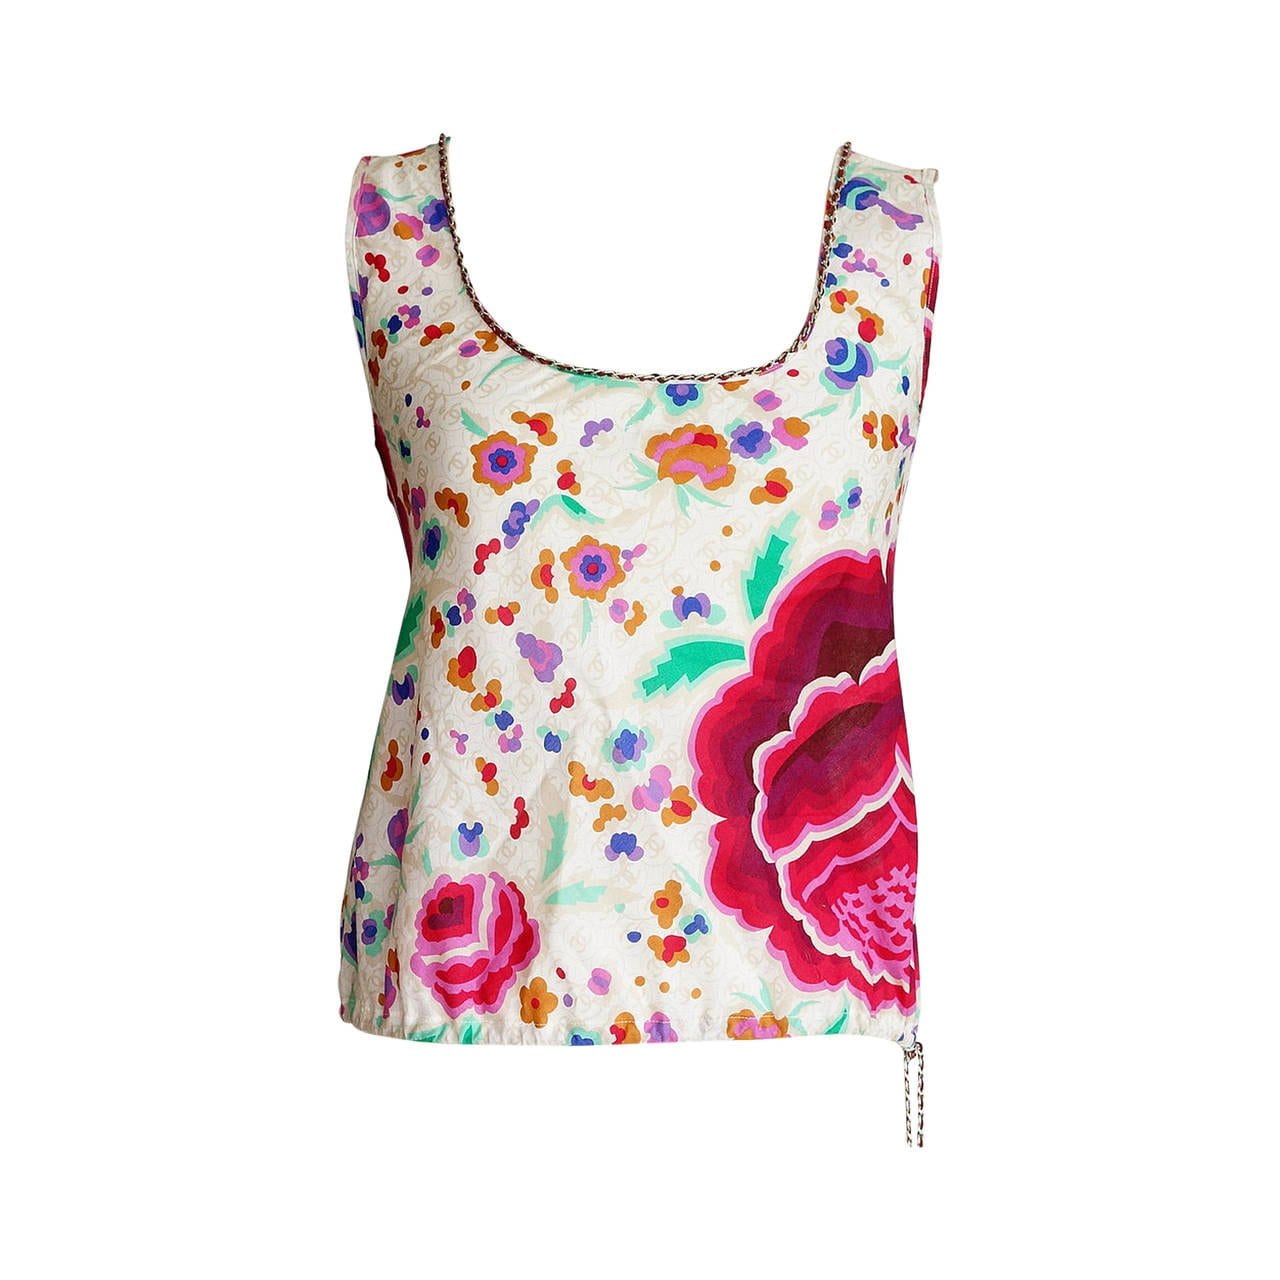 Chanel 04P Top Lush Flower Print Lots CC Signature Chain Detail 40 fits 4 to 6 - mightychic